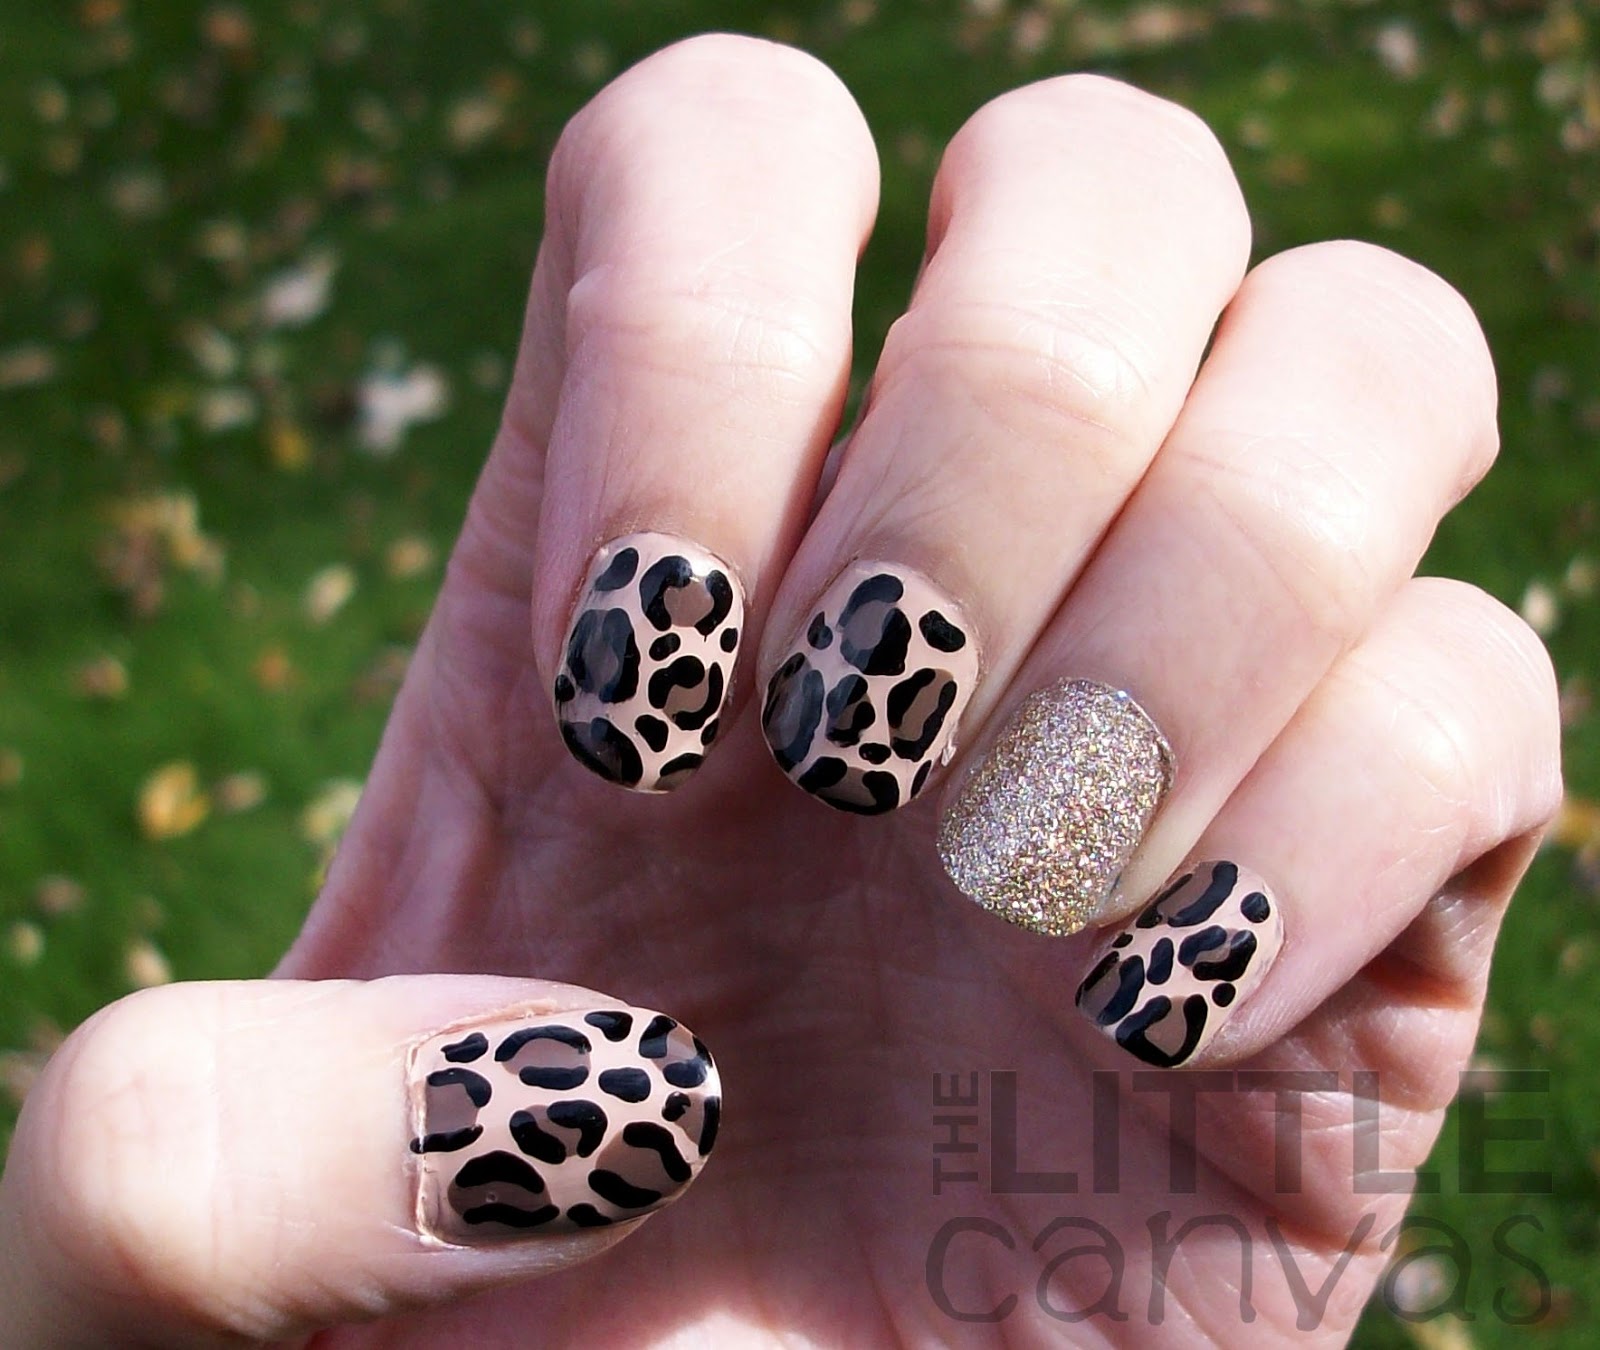 The Little Canvas: 31 Day Challenge - Day 18 - Animal Print - More Leopard  Spots